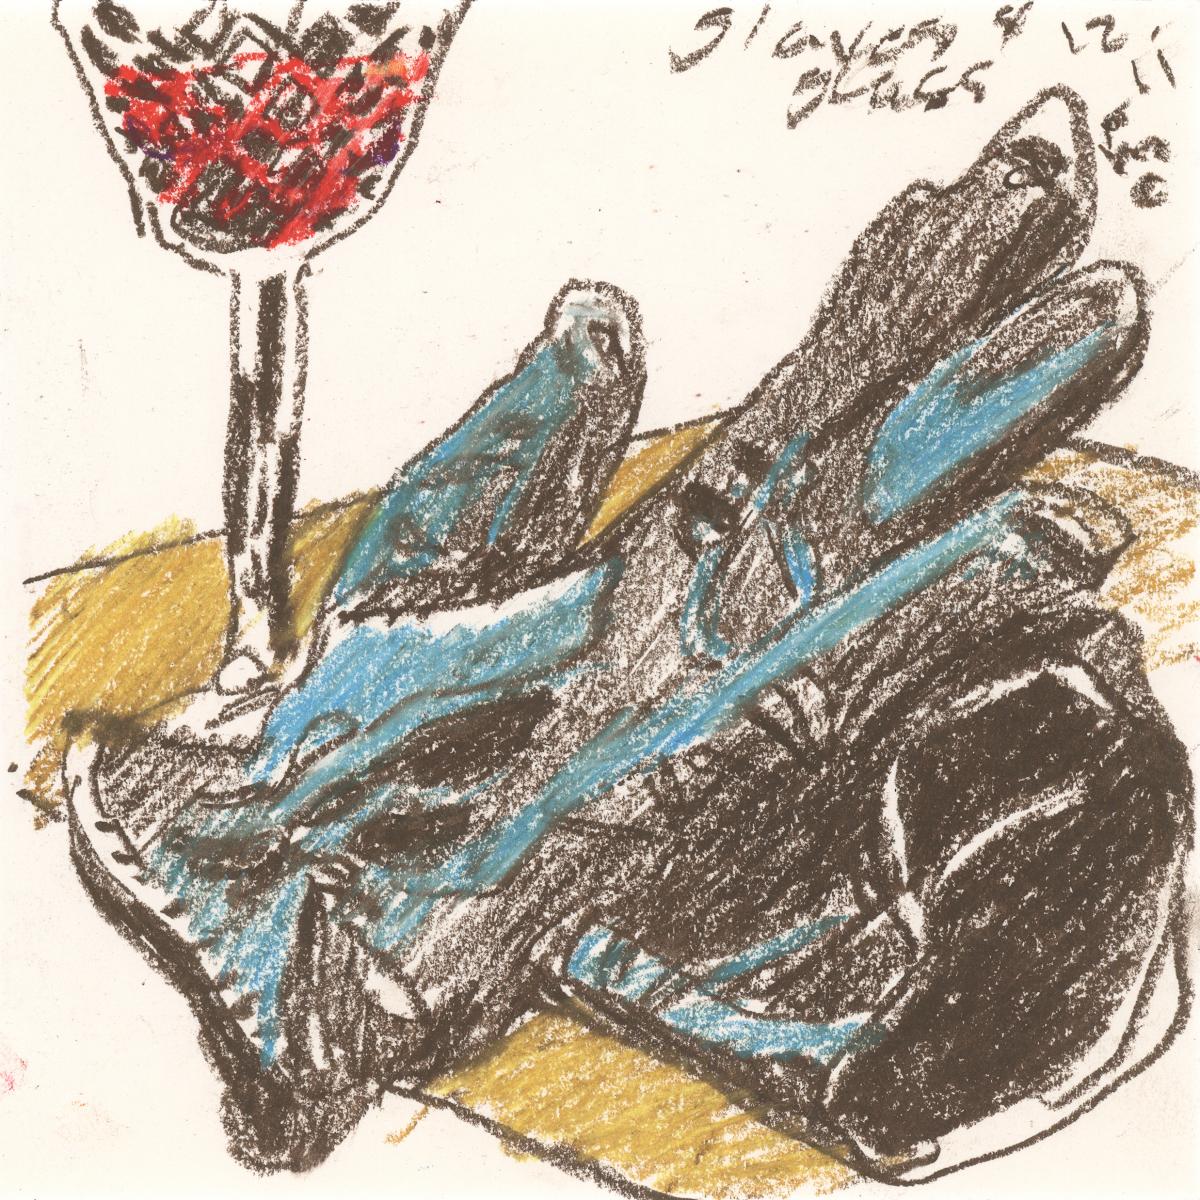 Gloves Worn II -oil pastel still life drawing by Frank Costantino